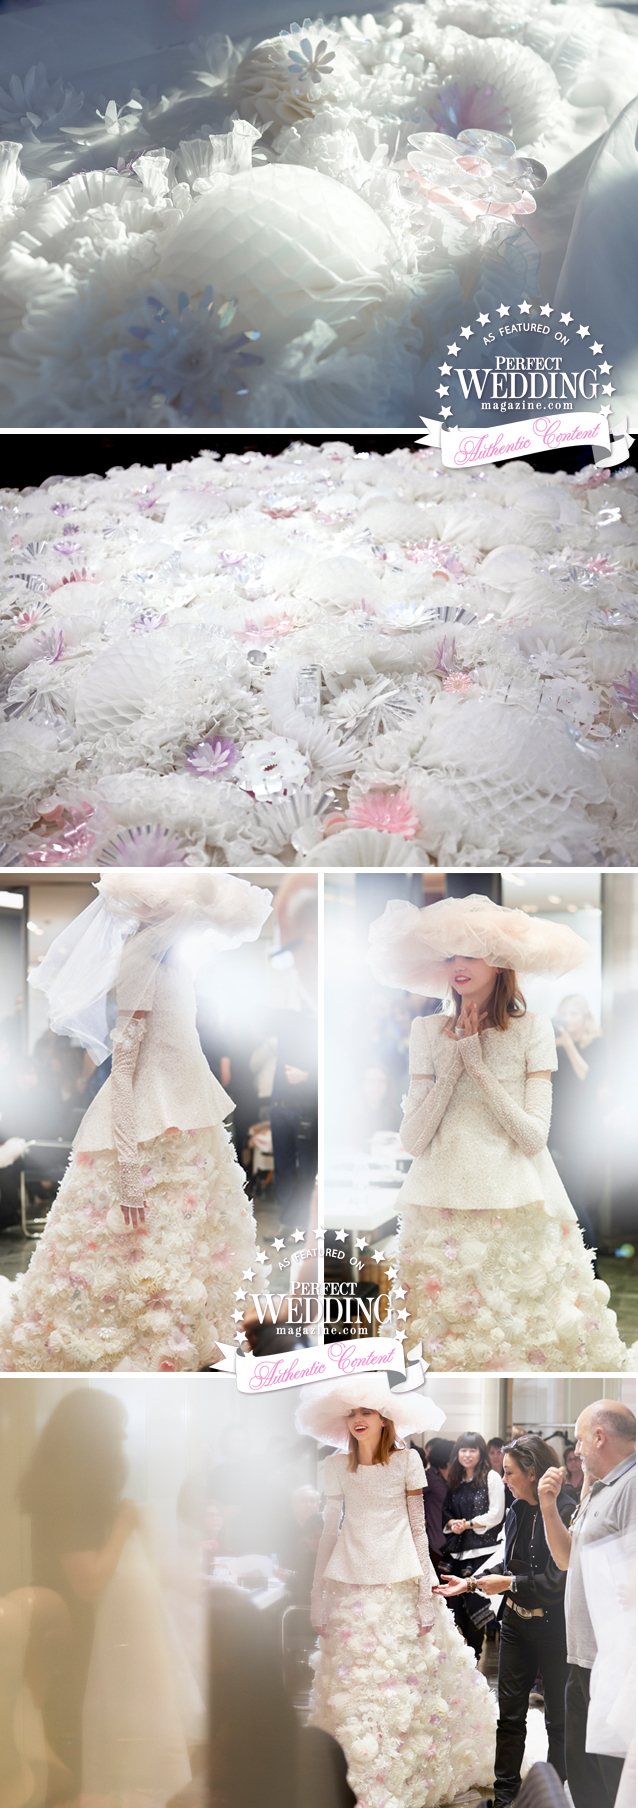 Chanel, Chanel Wedding Gown, Haute Couture Spring Summer 2015, Chanel Ateliers, Perfect Wedding magazine